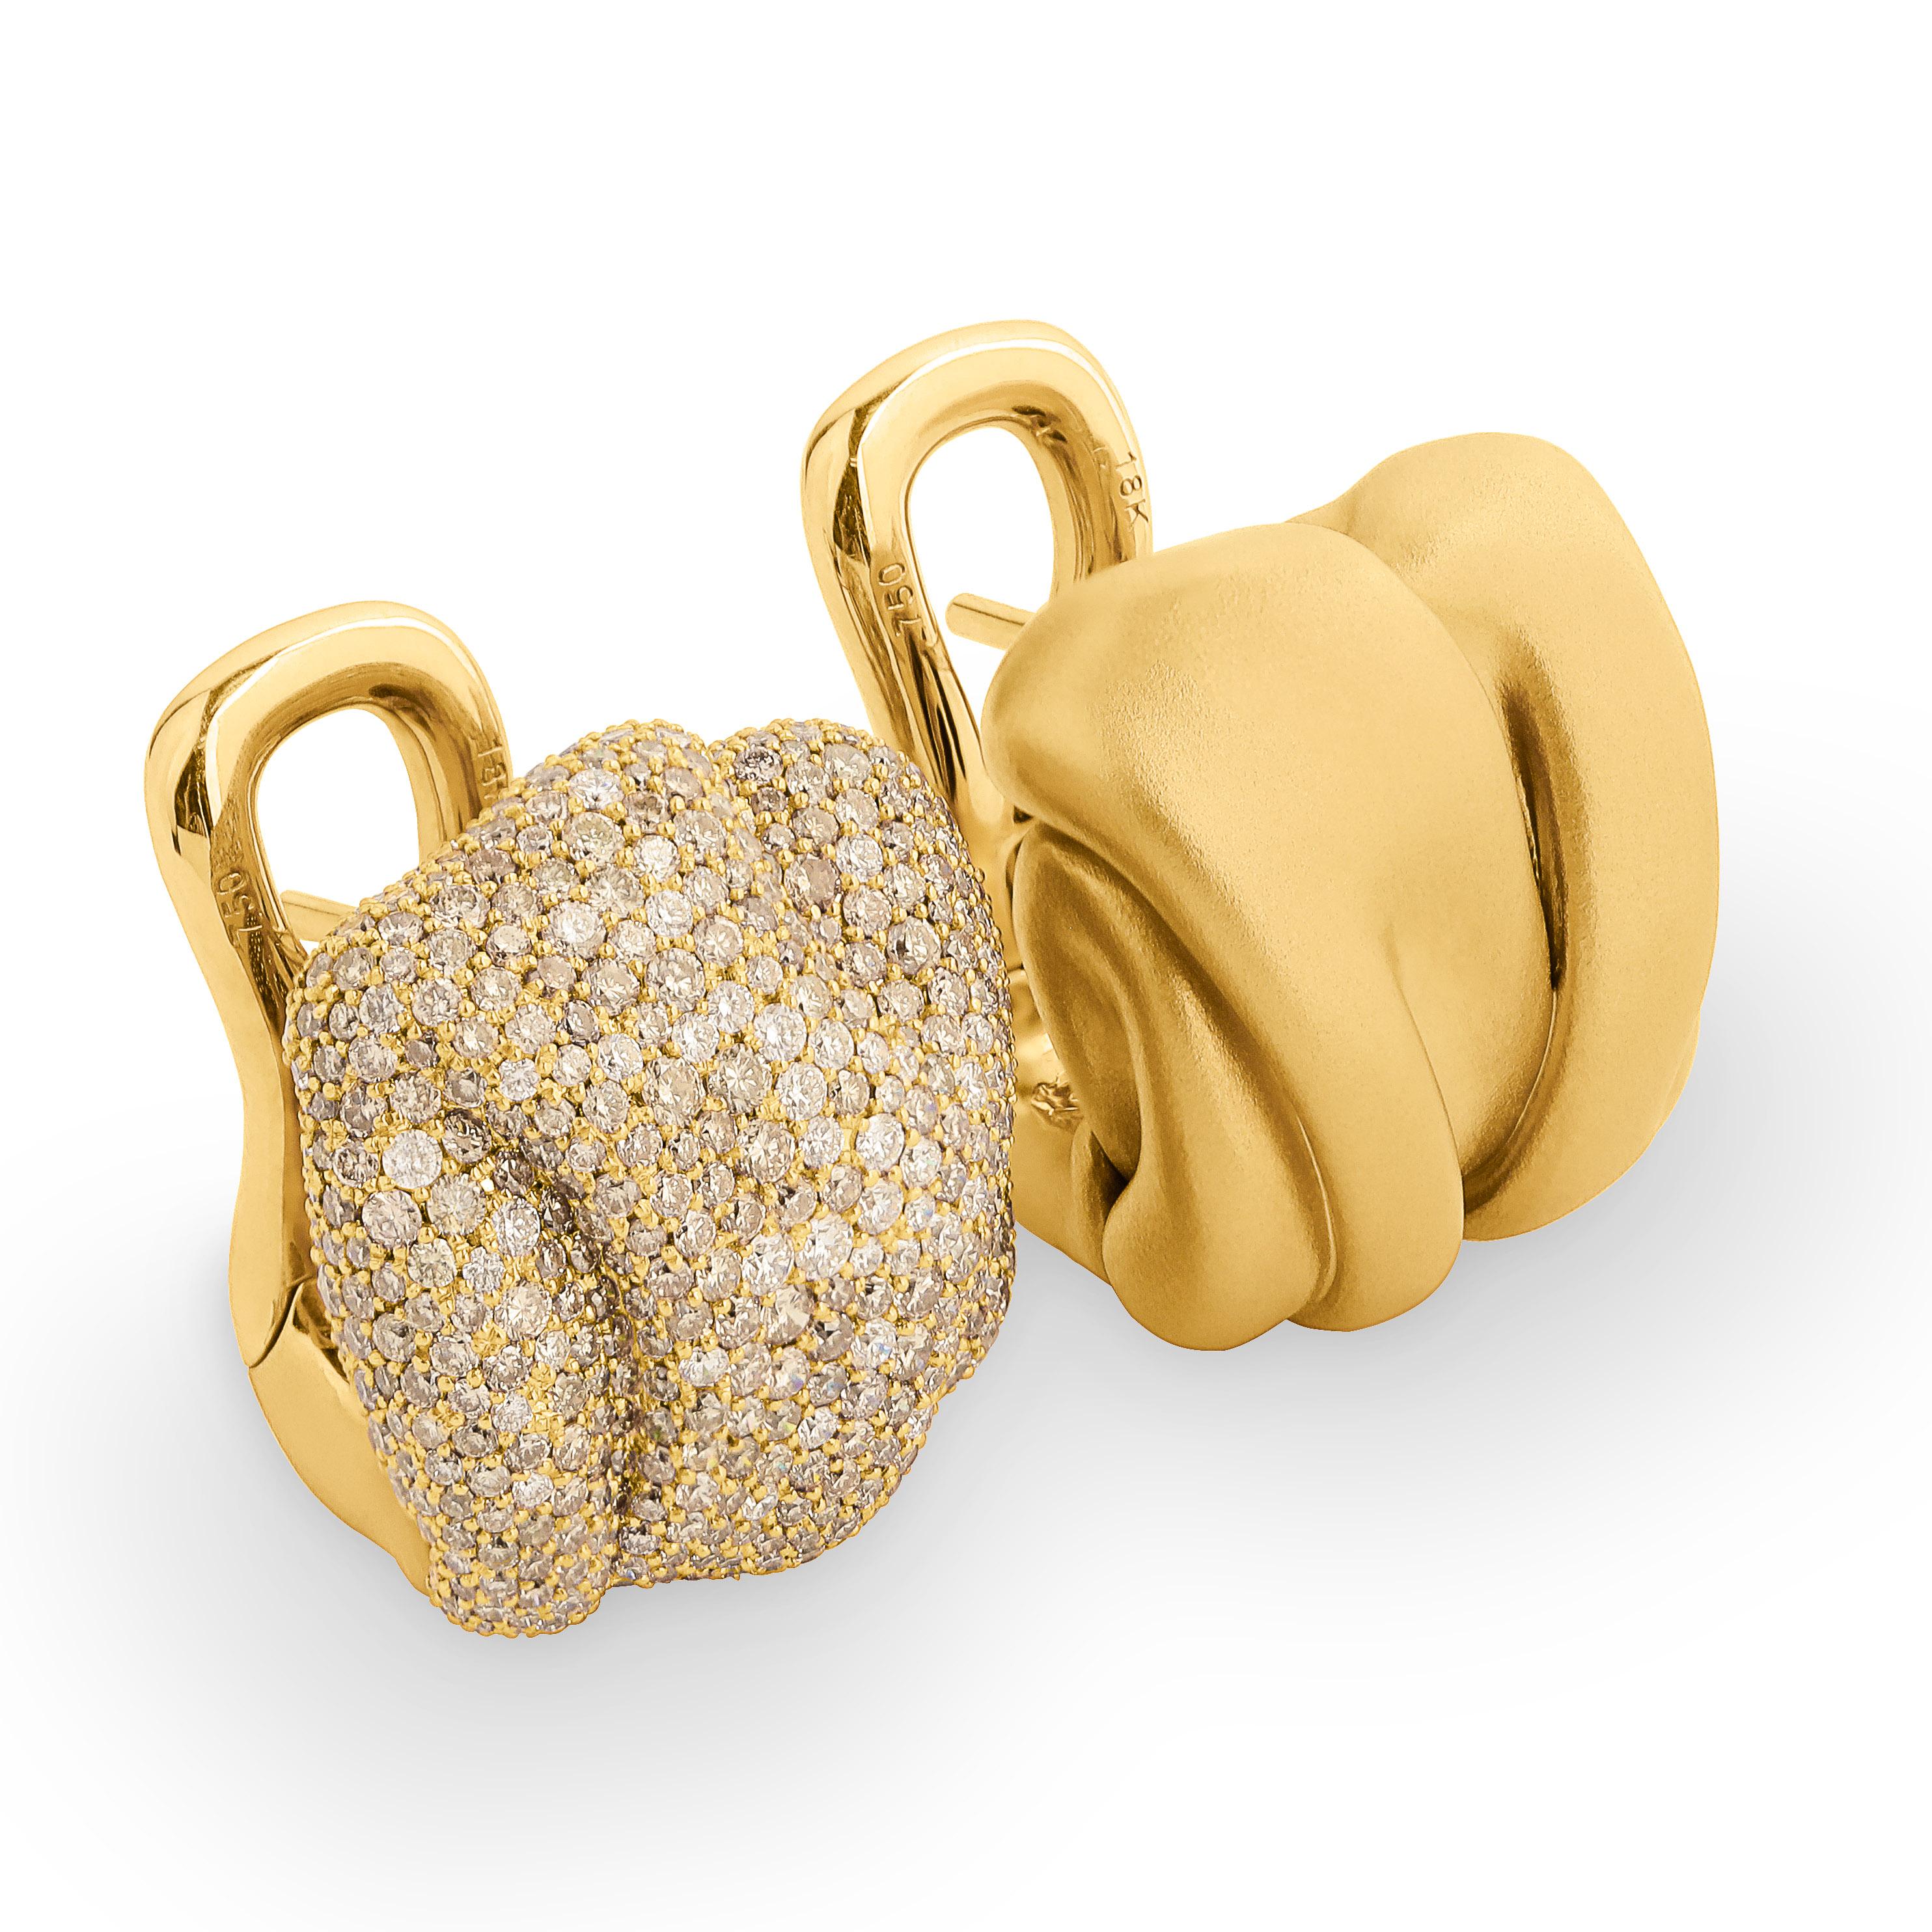 Diamonds 18 Karat White Gold Earrings
Our Pret-a-Porter collection is full of different textures and patterns. This time we decided to depict just a piece of crumpled fabric in the Earrings. One Earring is made of 18 Karat Matte Yellow Gold, another